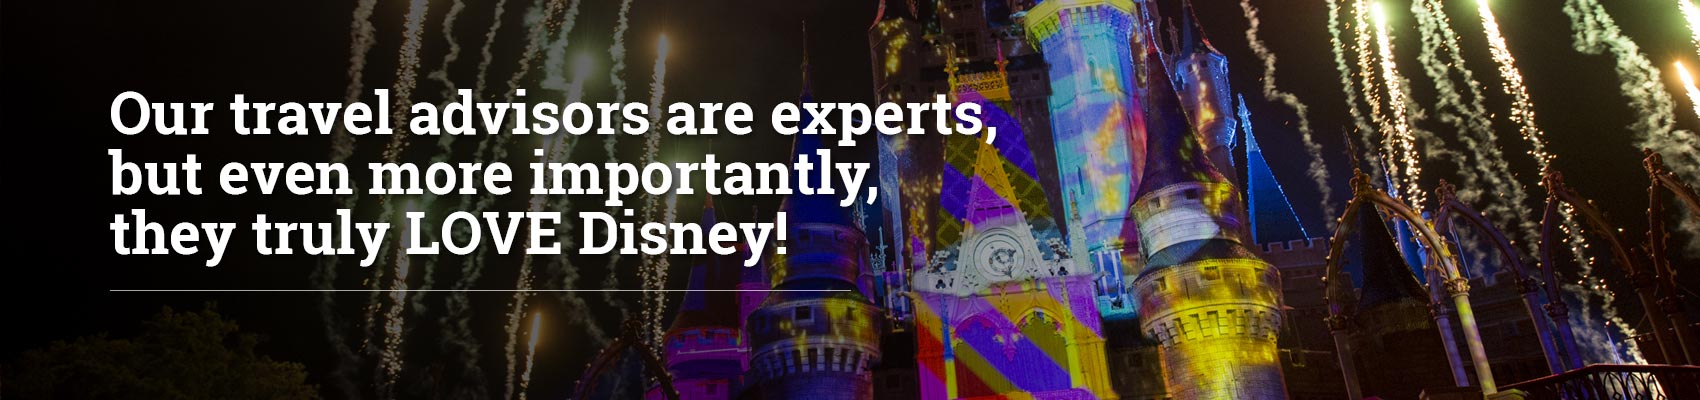 AAA travel advisors are experts, but even more importantly they truly LOVE Disney! 